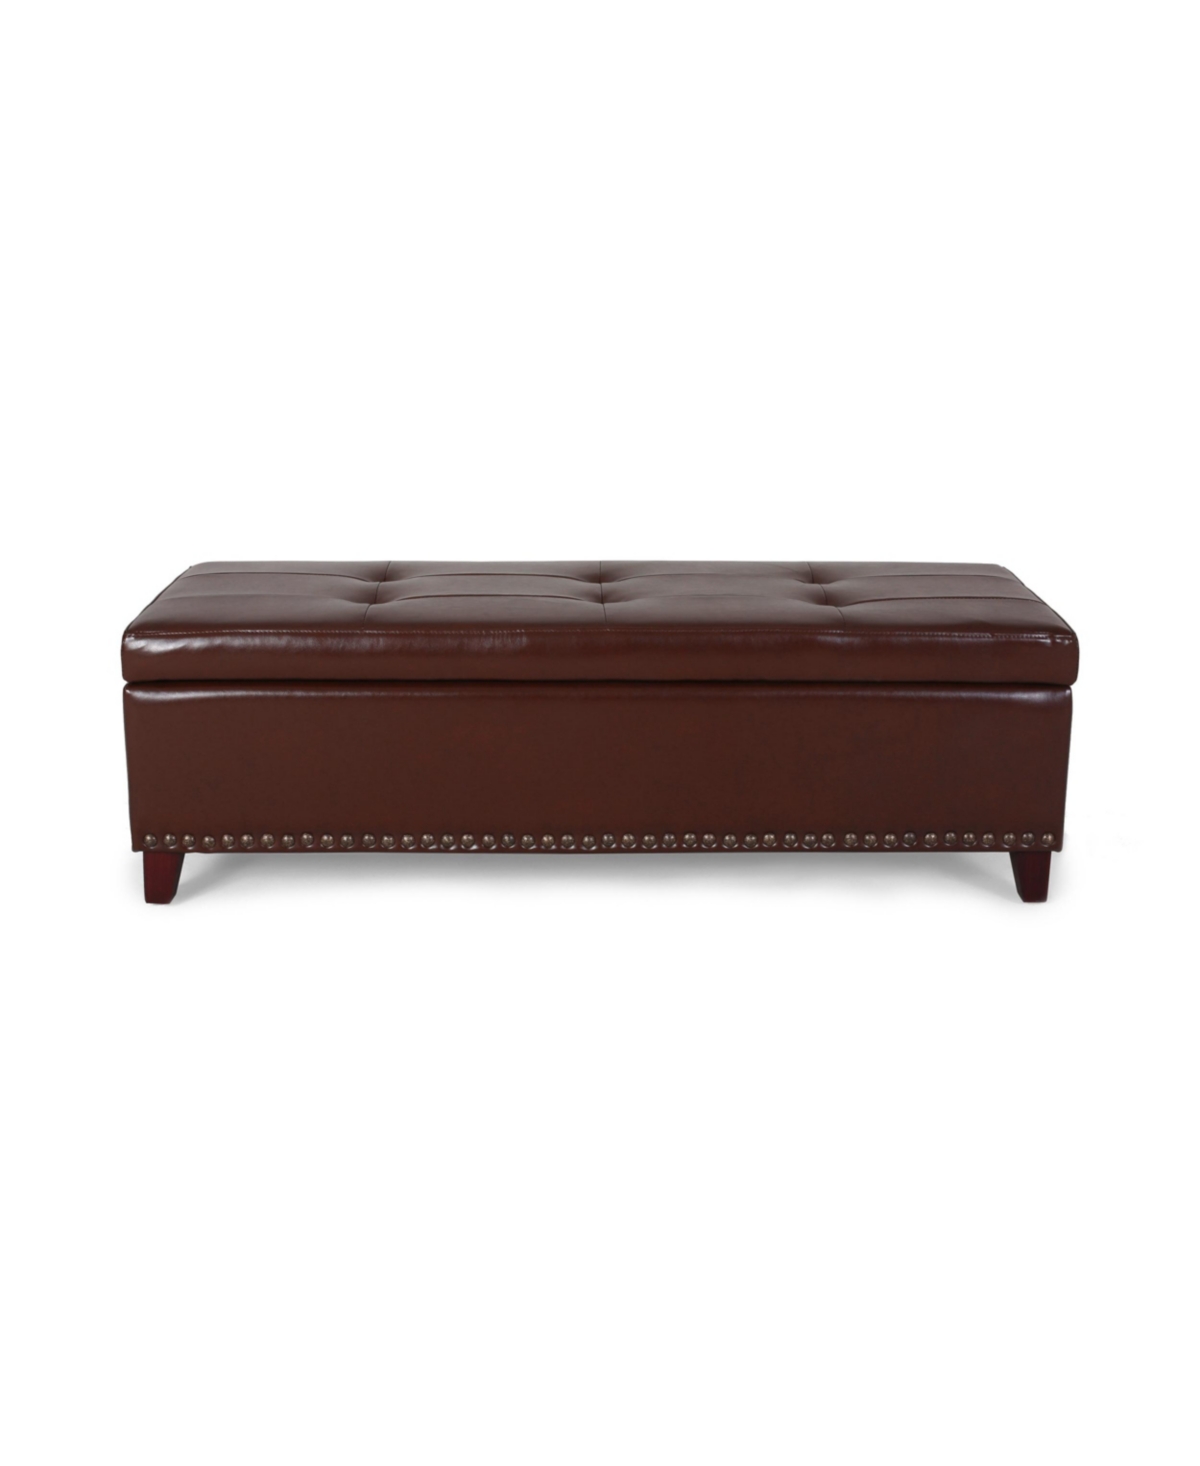 Noble House Gavin Contemporary Storage Ottoman With Nailhead Trim In Chestnut Brown